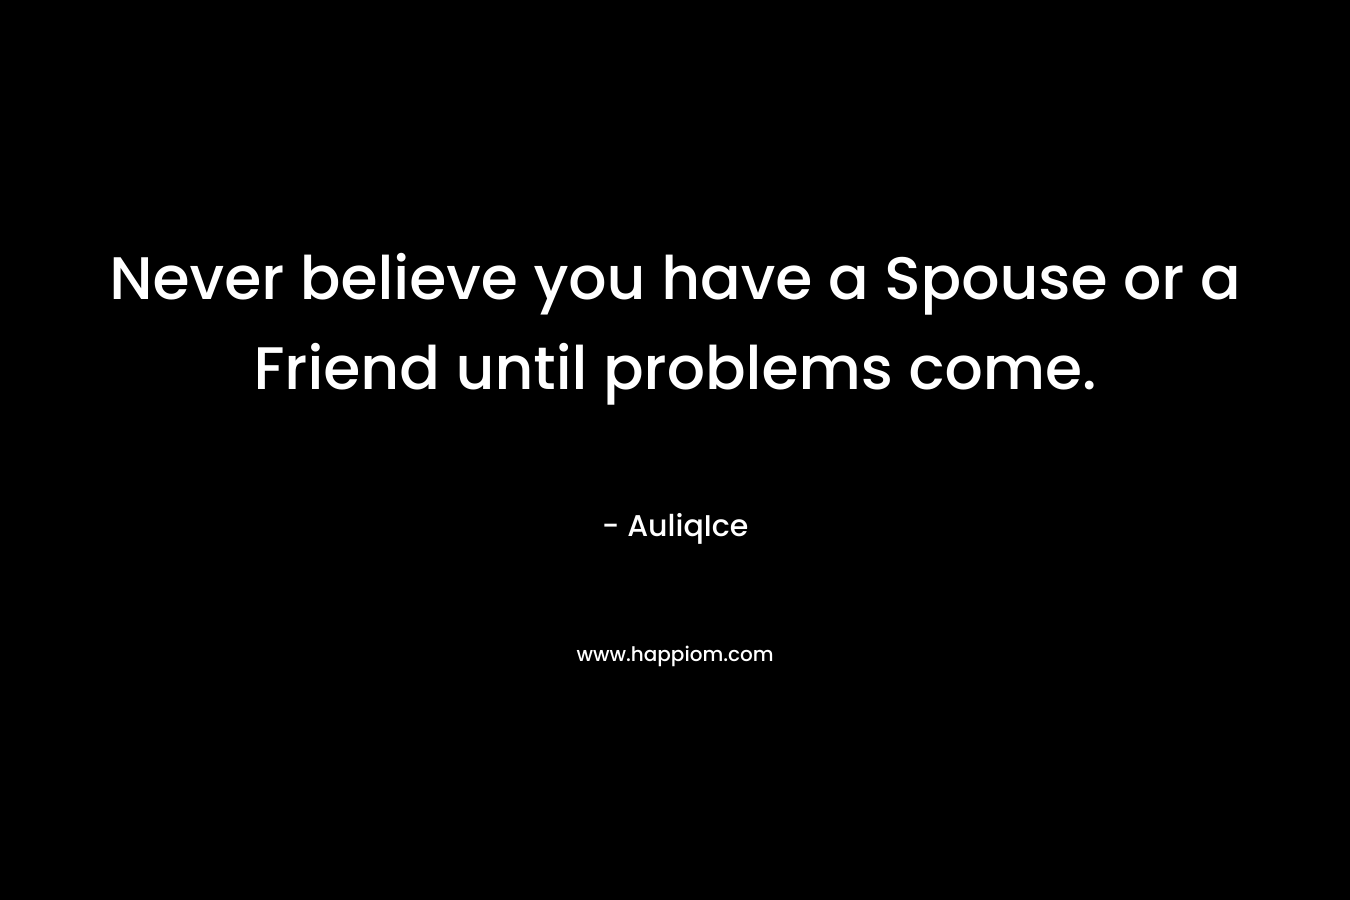 Never believe you have a Spouse or a Friend until problems come. – AuliqIce